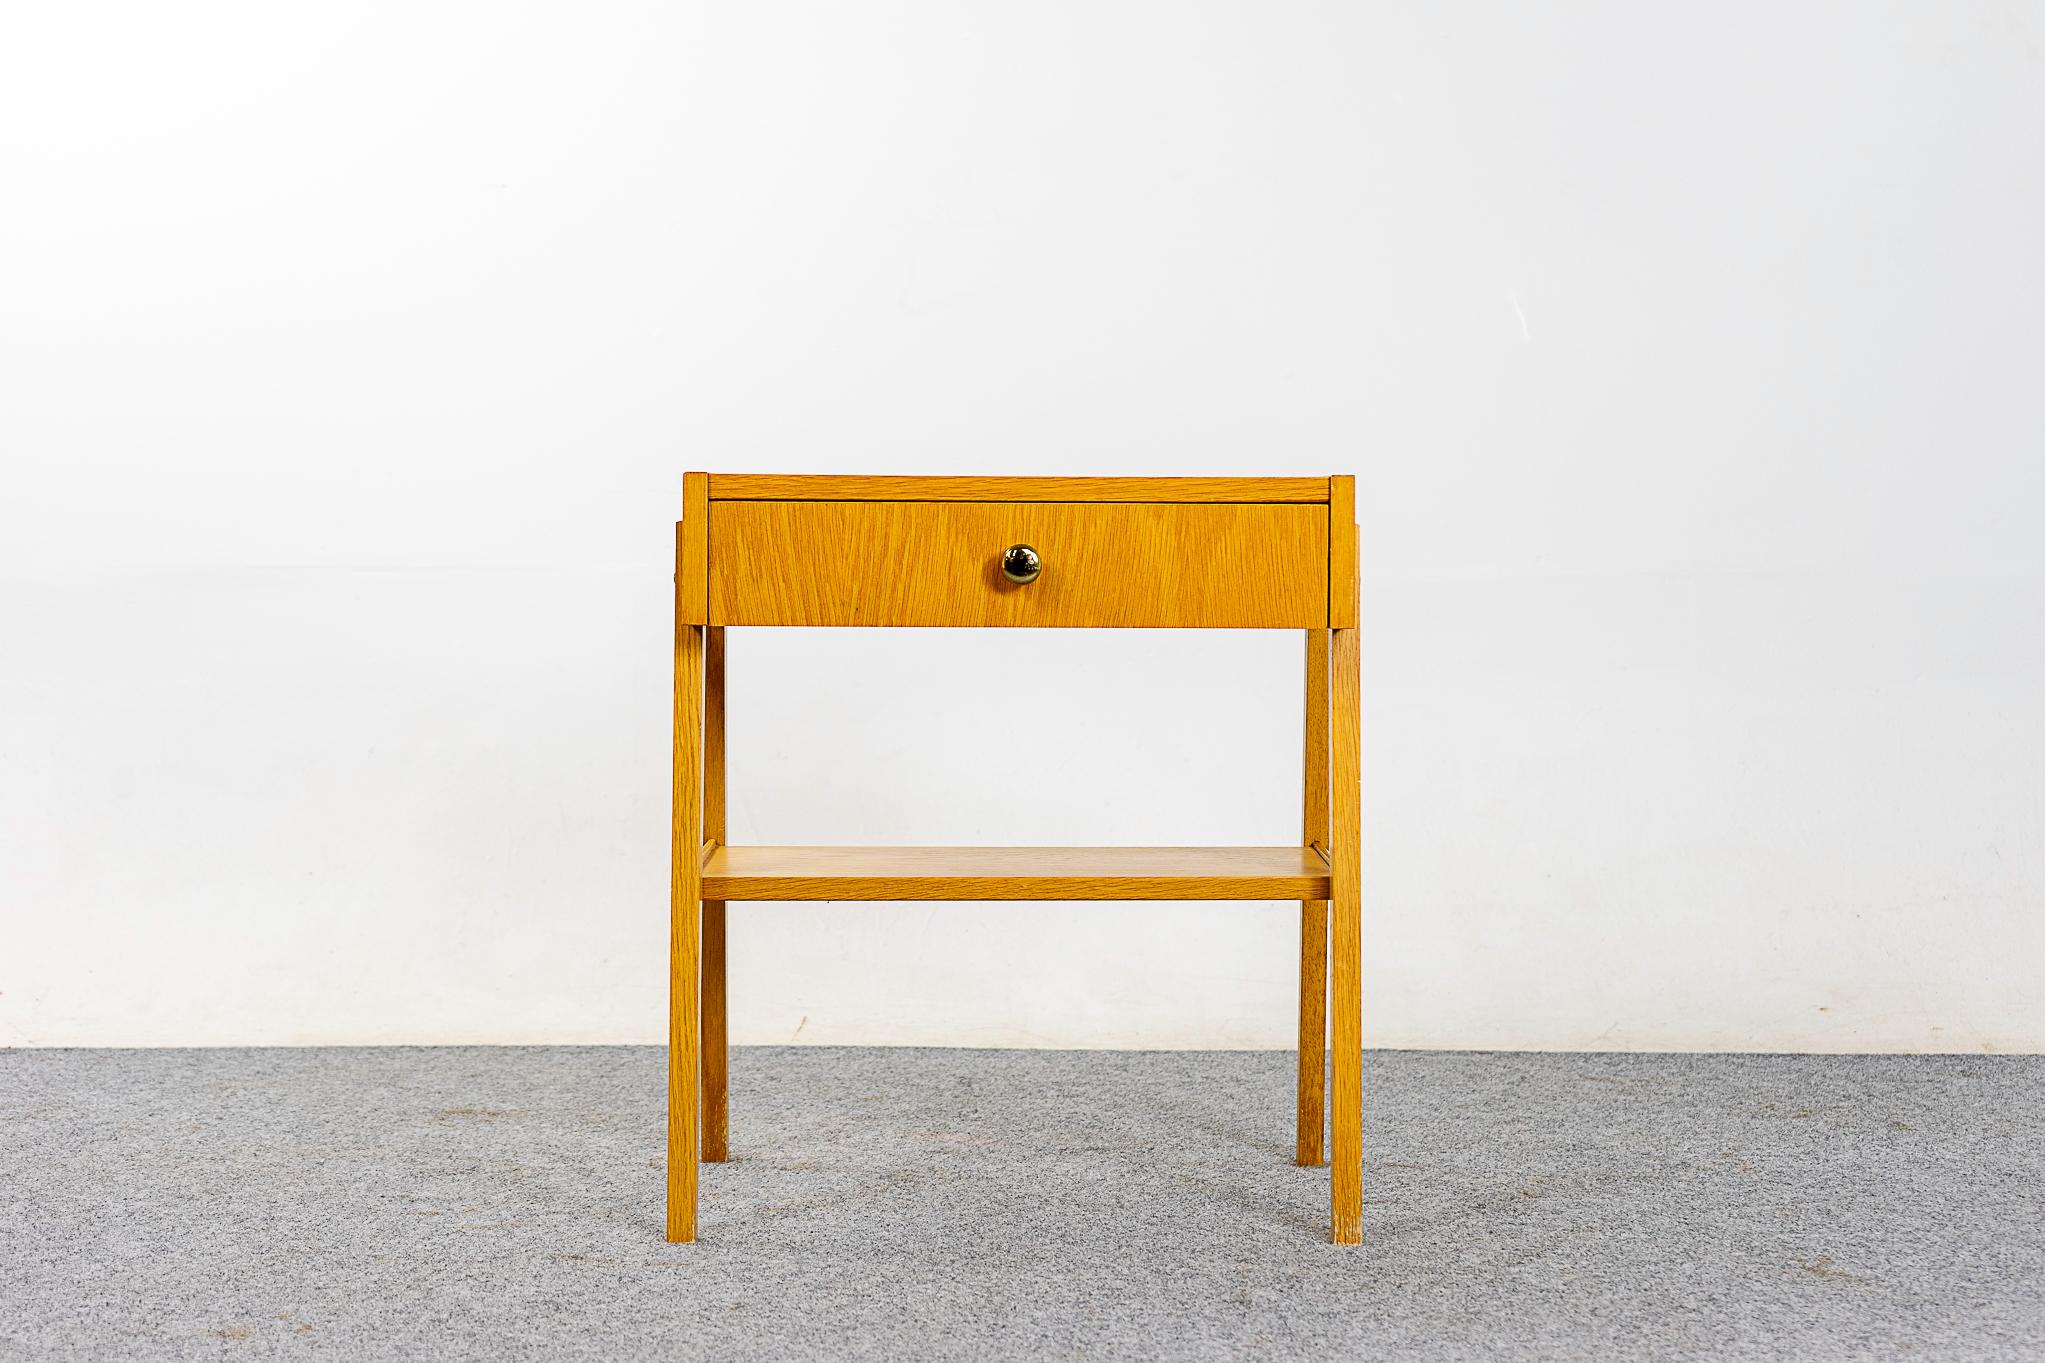 Oak Danish midcentury bedside table, circa 1960s. Dovetailed drawer offer storage for small items, lower shelf is perfect for your favorite book! Beautifully veneered case rests on slender splayed legs.

Unrestored item, some minor marks consistent